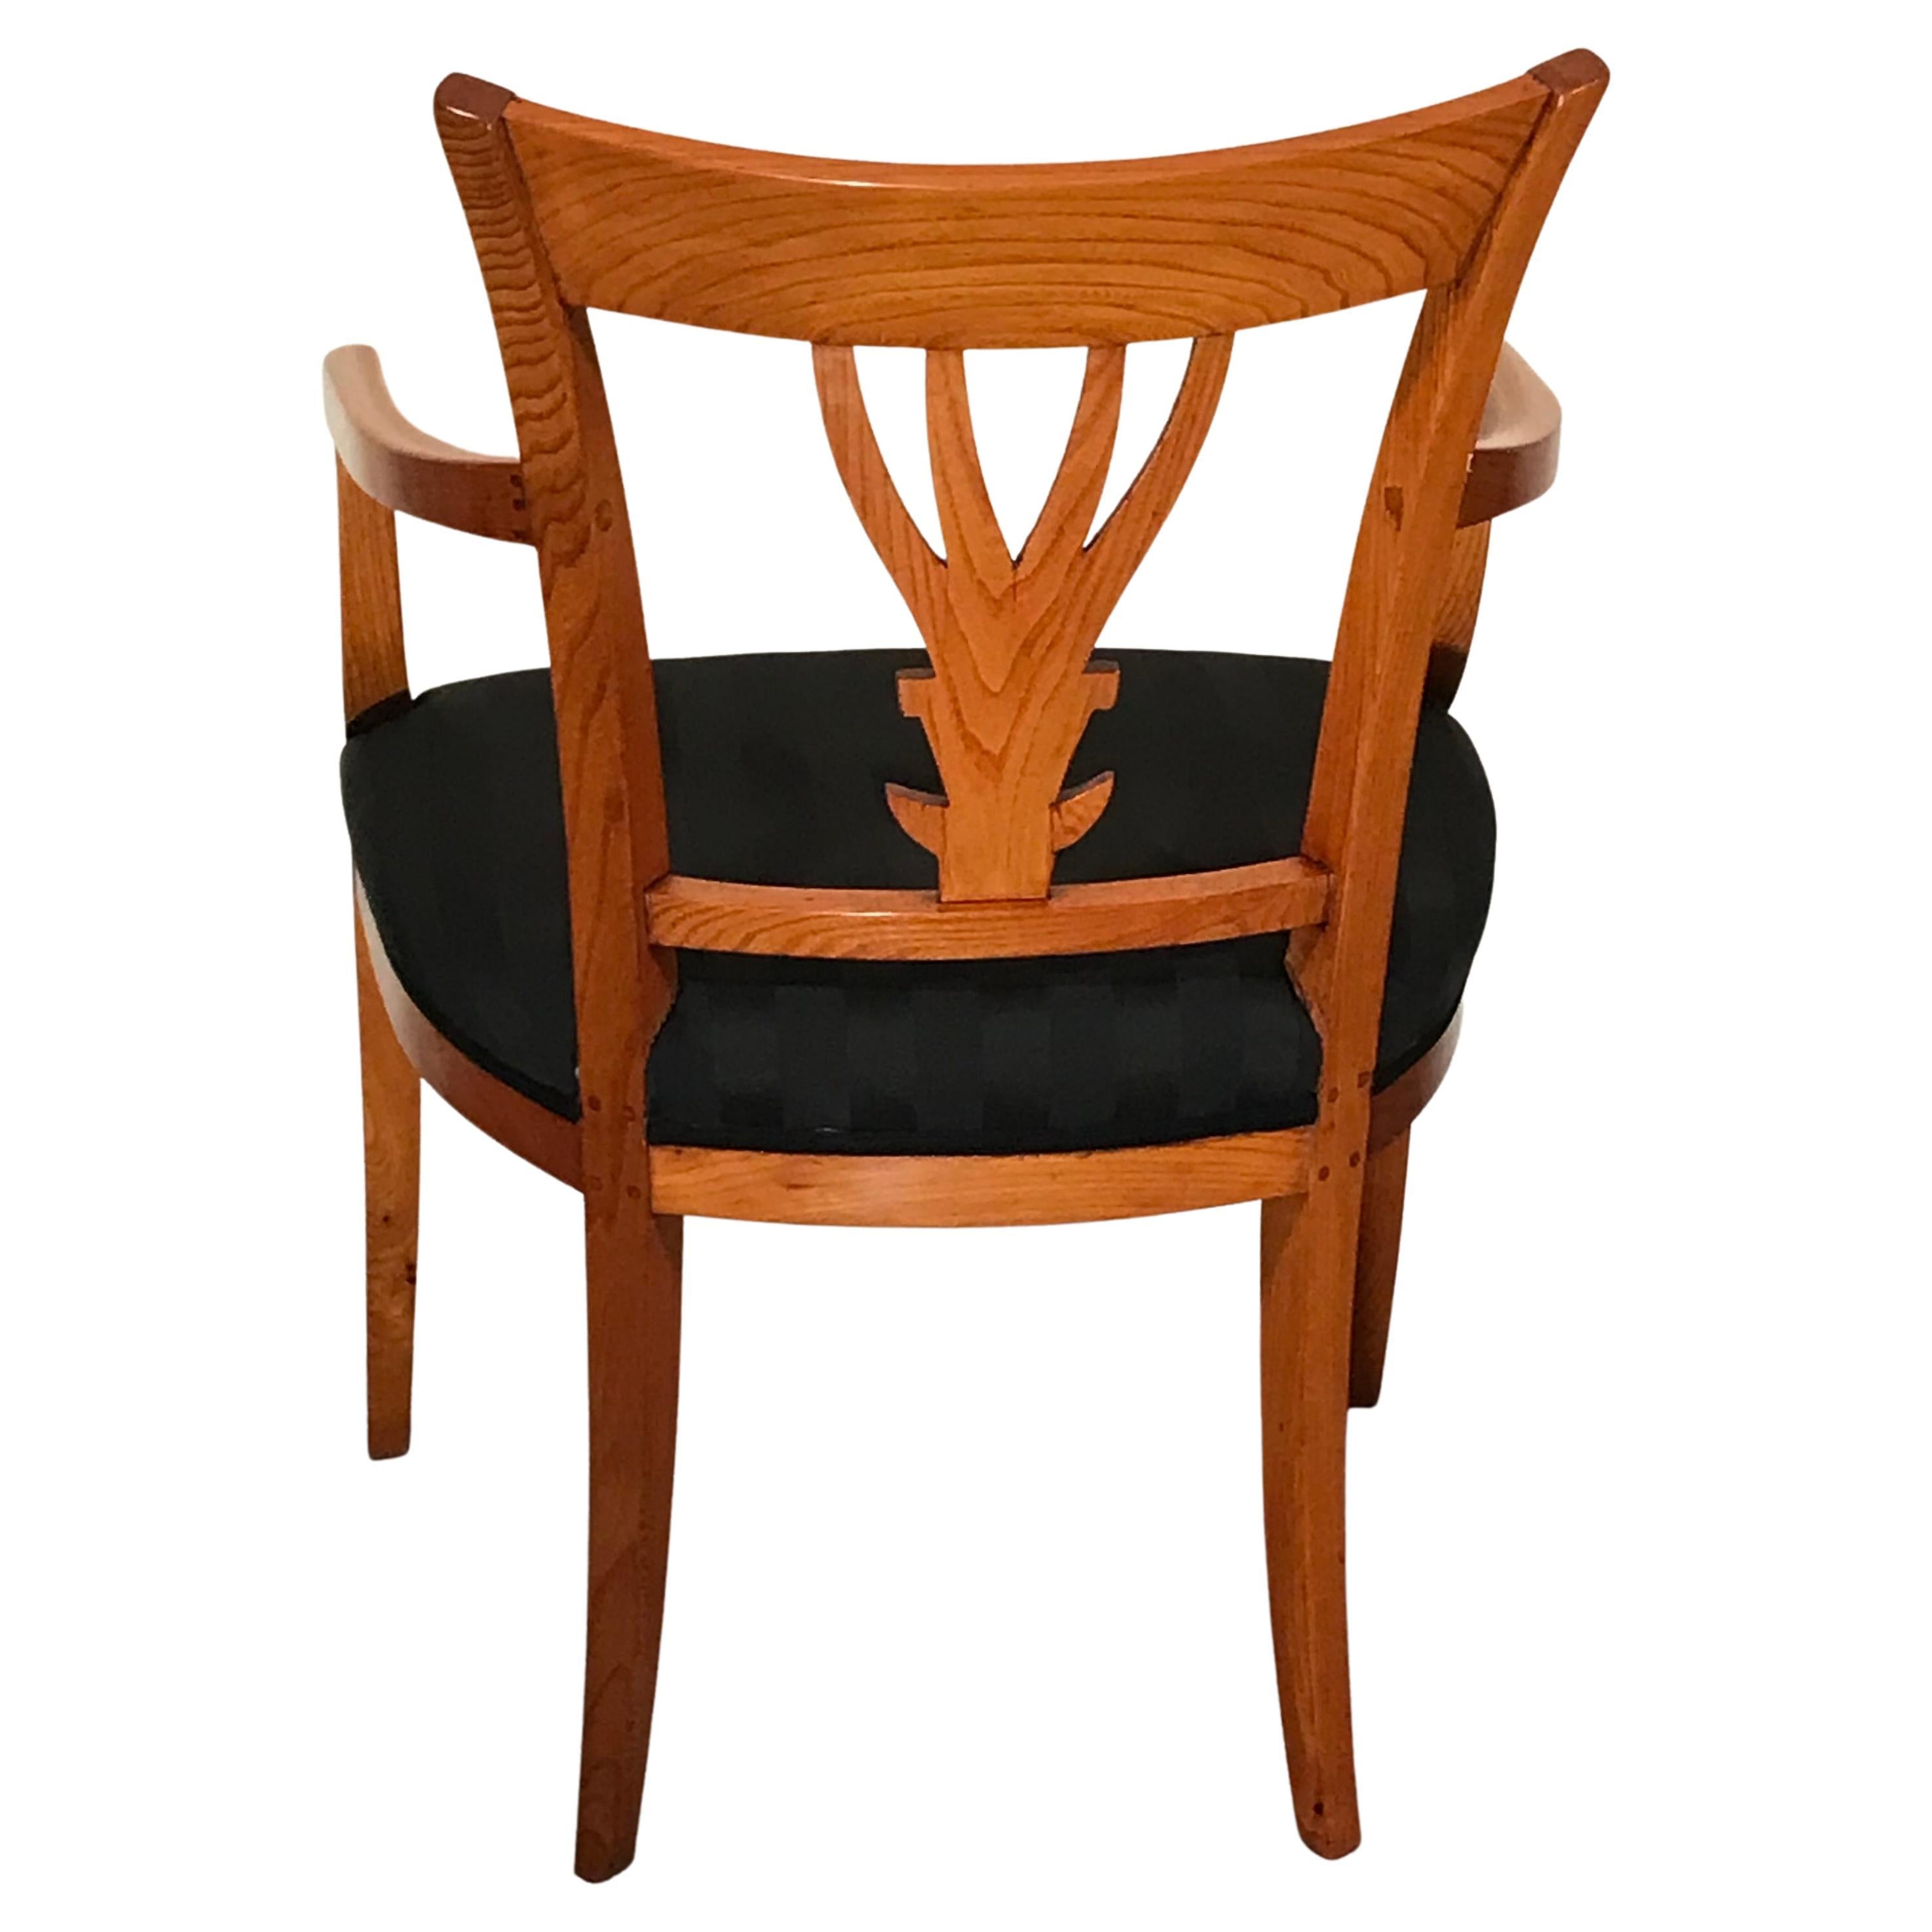 Beautifully designed Neoclassical Armchair dating back to around 1820-30. The chair comes from southwest Germany, The back has a very pretty open work design with a hand-carved leave design. The armchair comes refinished and has a new upholstery and